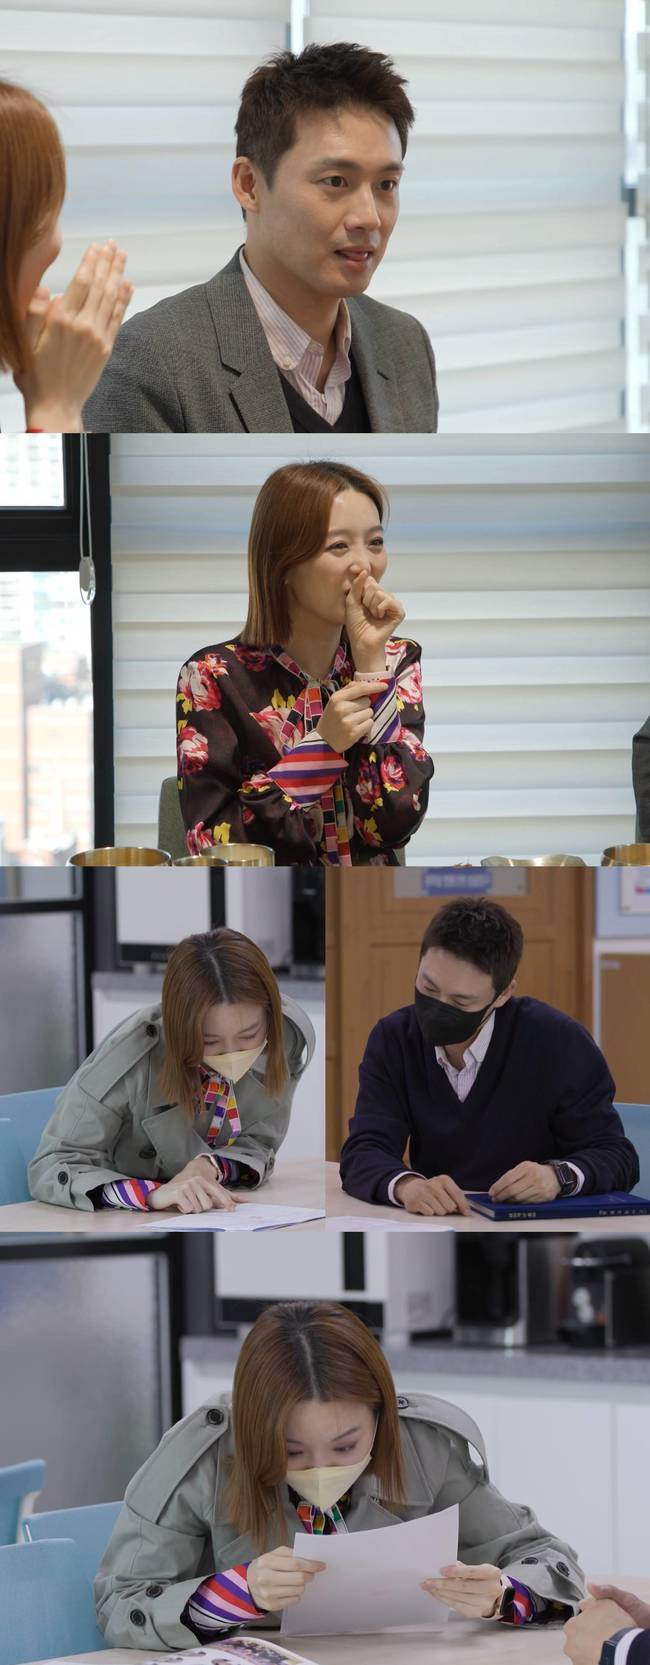 Oh Sang-jin utters bombshell remark about First LoveOn November 14th, SBS  ⁇  Same Bed, Different Dreams 2: You Are My Dest - You are My Destiny (You are My Destiny) Oh Sang-jin Oh Sang-jin, Kim So-young The couples appearance is revealed.Oh Sang-jin and Kim So-young visit Ulsan for the first time in more than a decade. When they enter a roundabout in the city, Oh Sang-jin can not hide his excitement.It was a historical place where Ulsan middle and high school students met with each other during their school days.Oh Sang-jin, who is filled with old memories, surprises everyone by blowing up a bombshell saying that the reason why he gave up his luck was because of First Love he met in high school.Oh Sang-jin then tries to contact his wife Kim So-young with a questionable woman without warning, making everyone nervous.Oh Sang-jin is a woman who changed my life. I can not hide my nervousness all the time waiting for her. Finally, when a questionable woman appeared, Oh Sang-jin said, I really wanted to meet you.It also reveals Oh Sang-jins surprise past, which caused Kim So-youngs pupil earthquake while the two were unraveling.